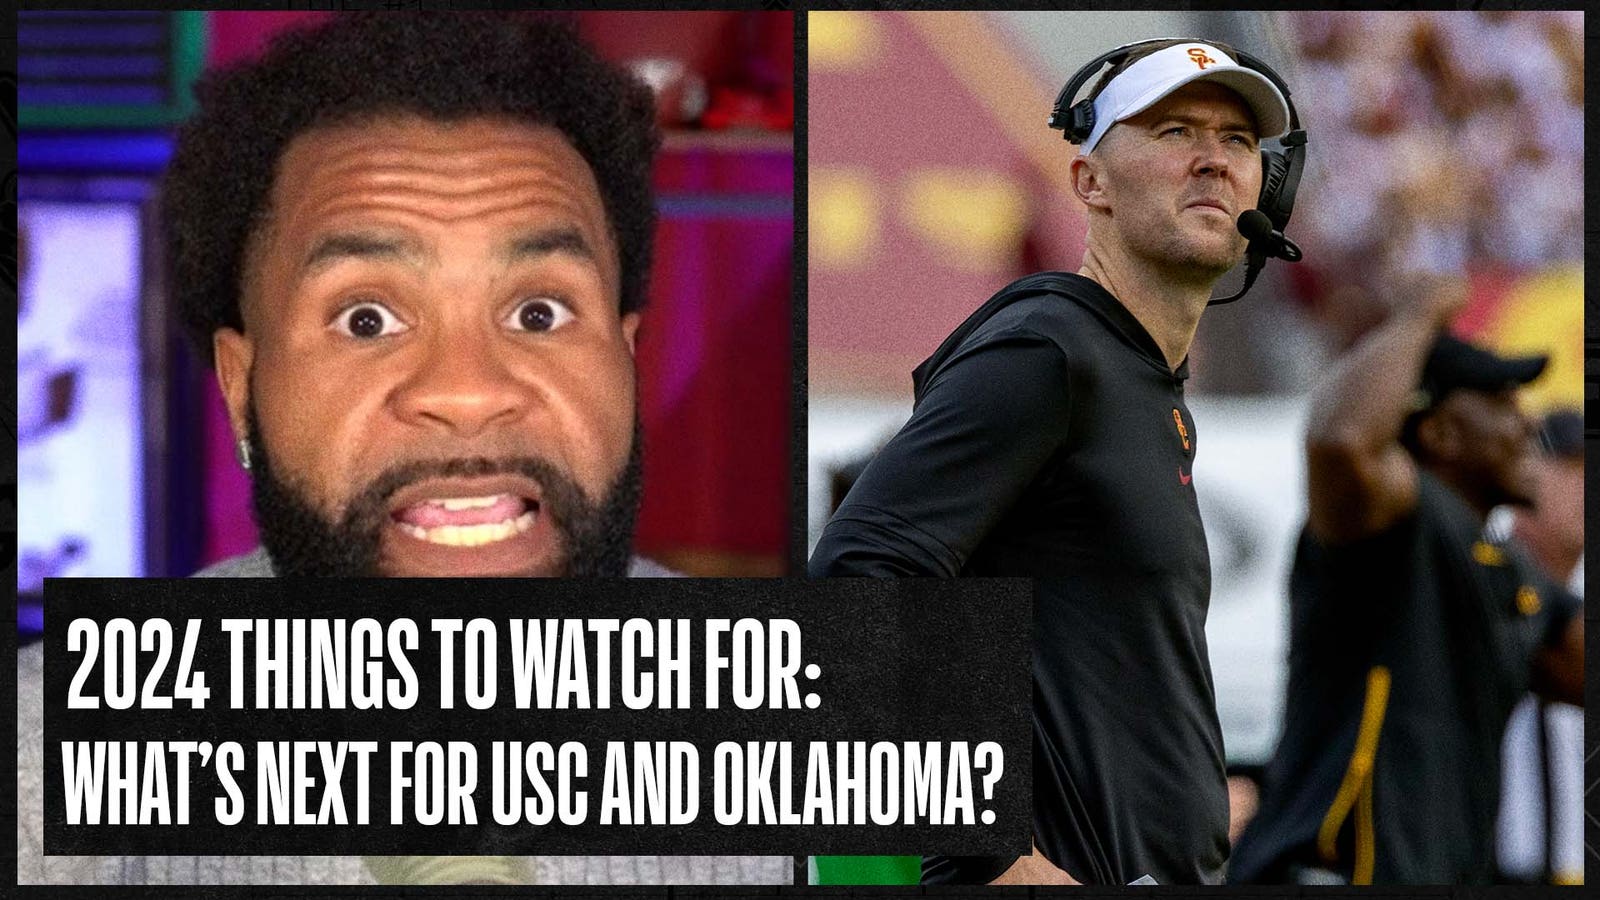 USC and Oklahoma enter pivotal year: What will Lincoln Riley & Brent Venables do in Year 3?